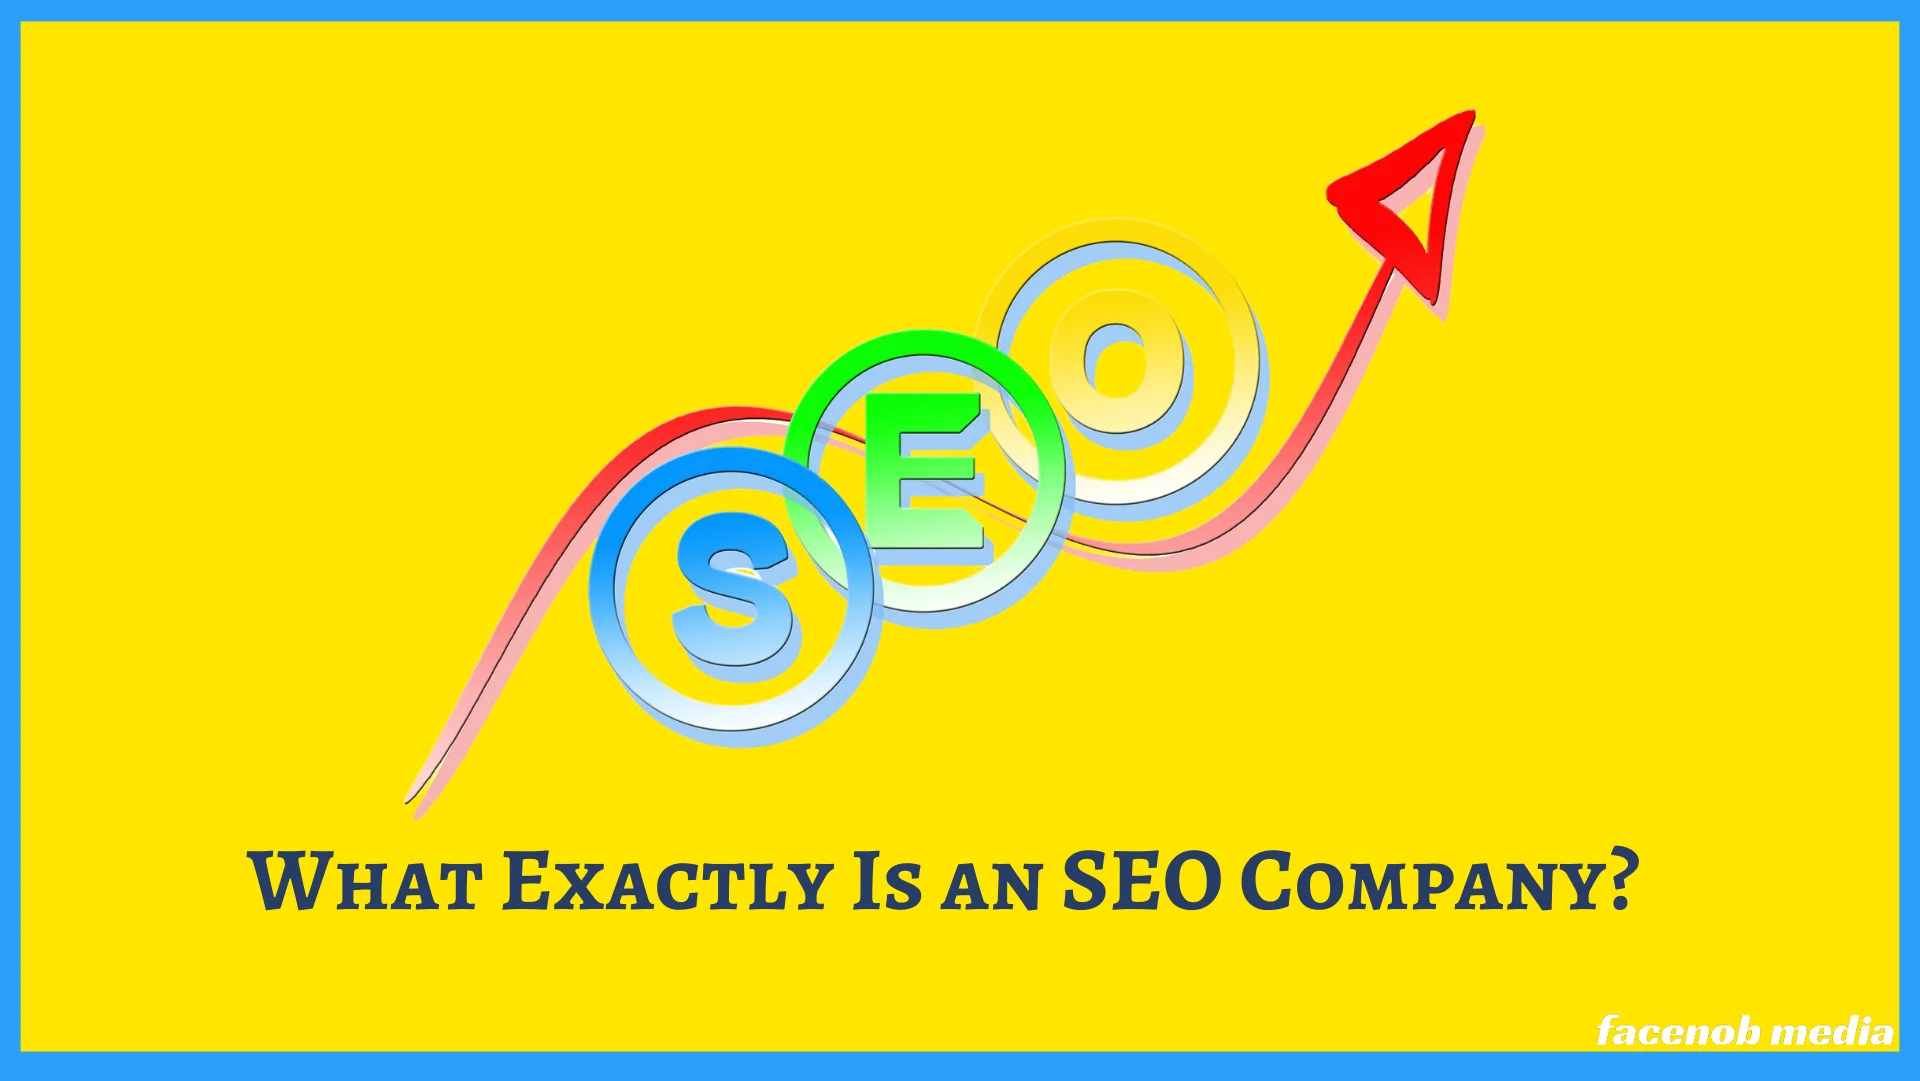 What Exactly Is an SEO Company?